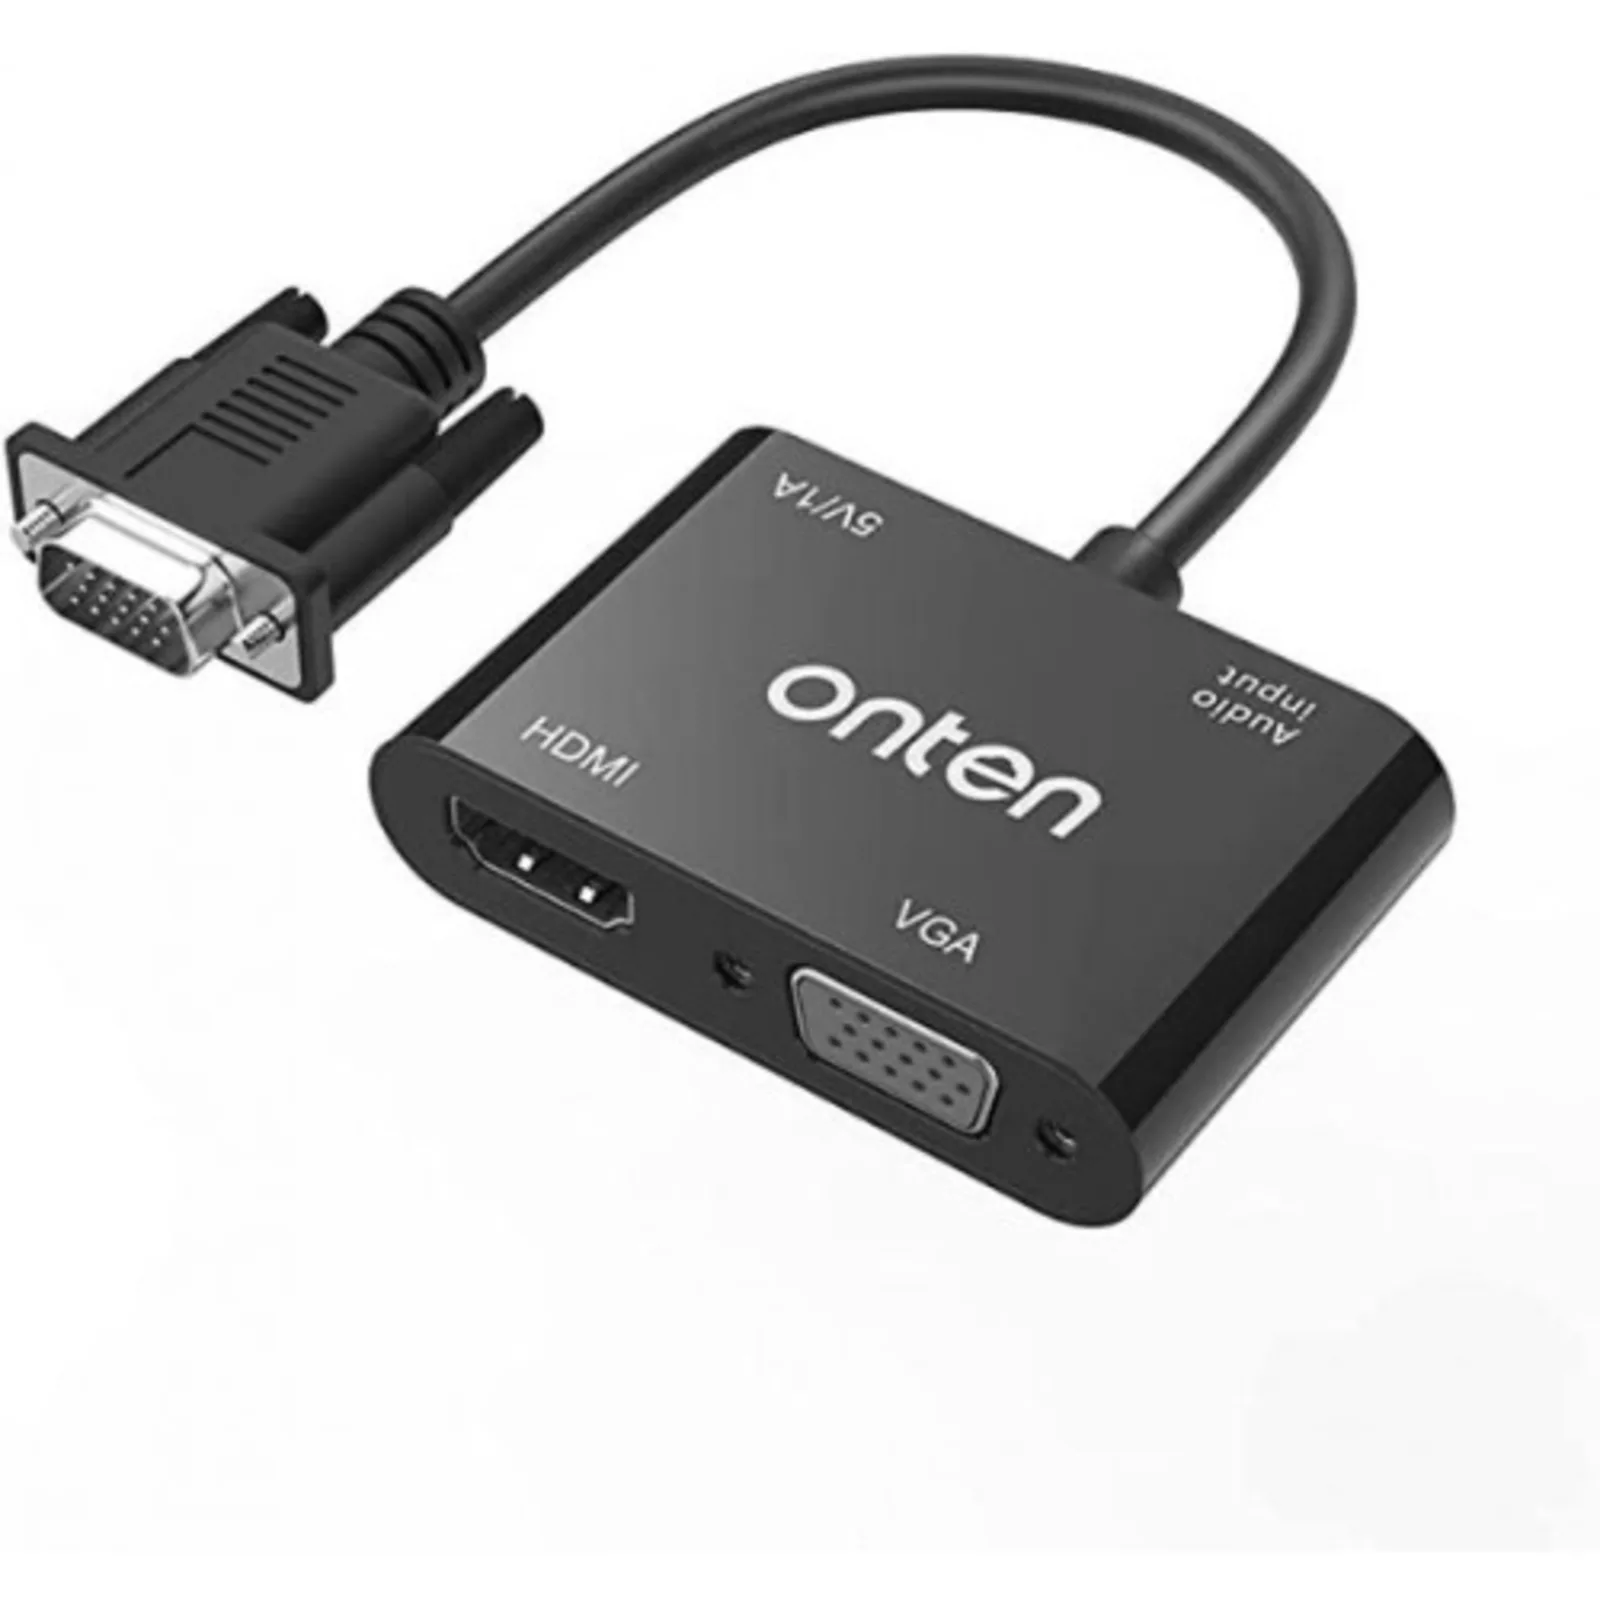 Onten Otn-5138HV Vga to Hdmi + Vga Adapter with Audio